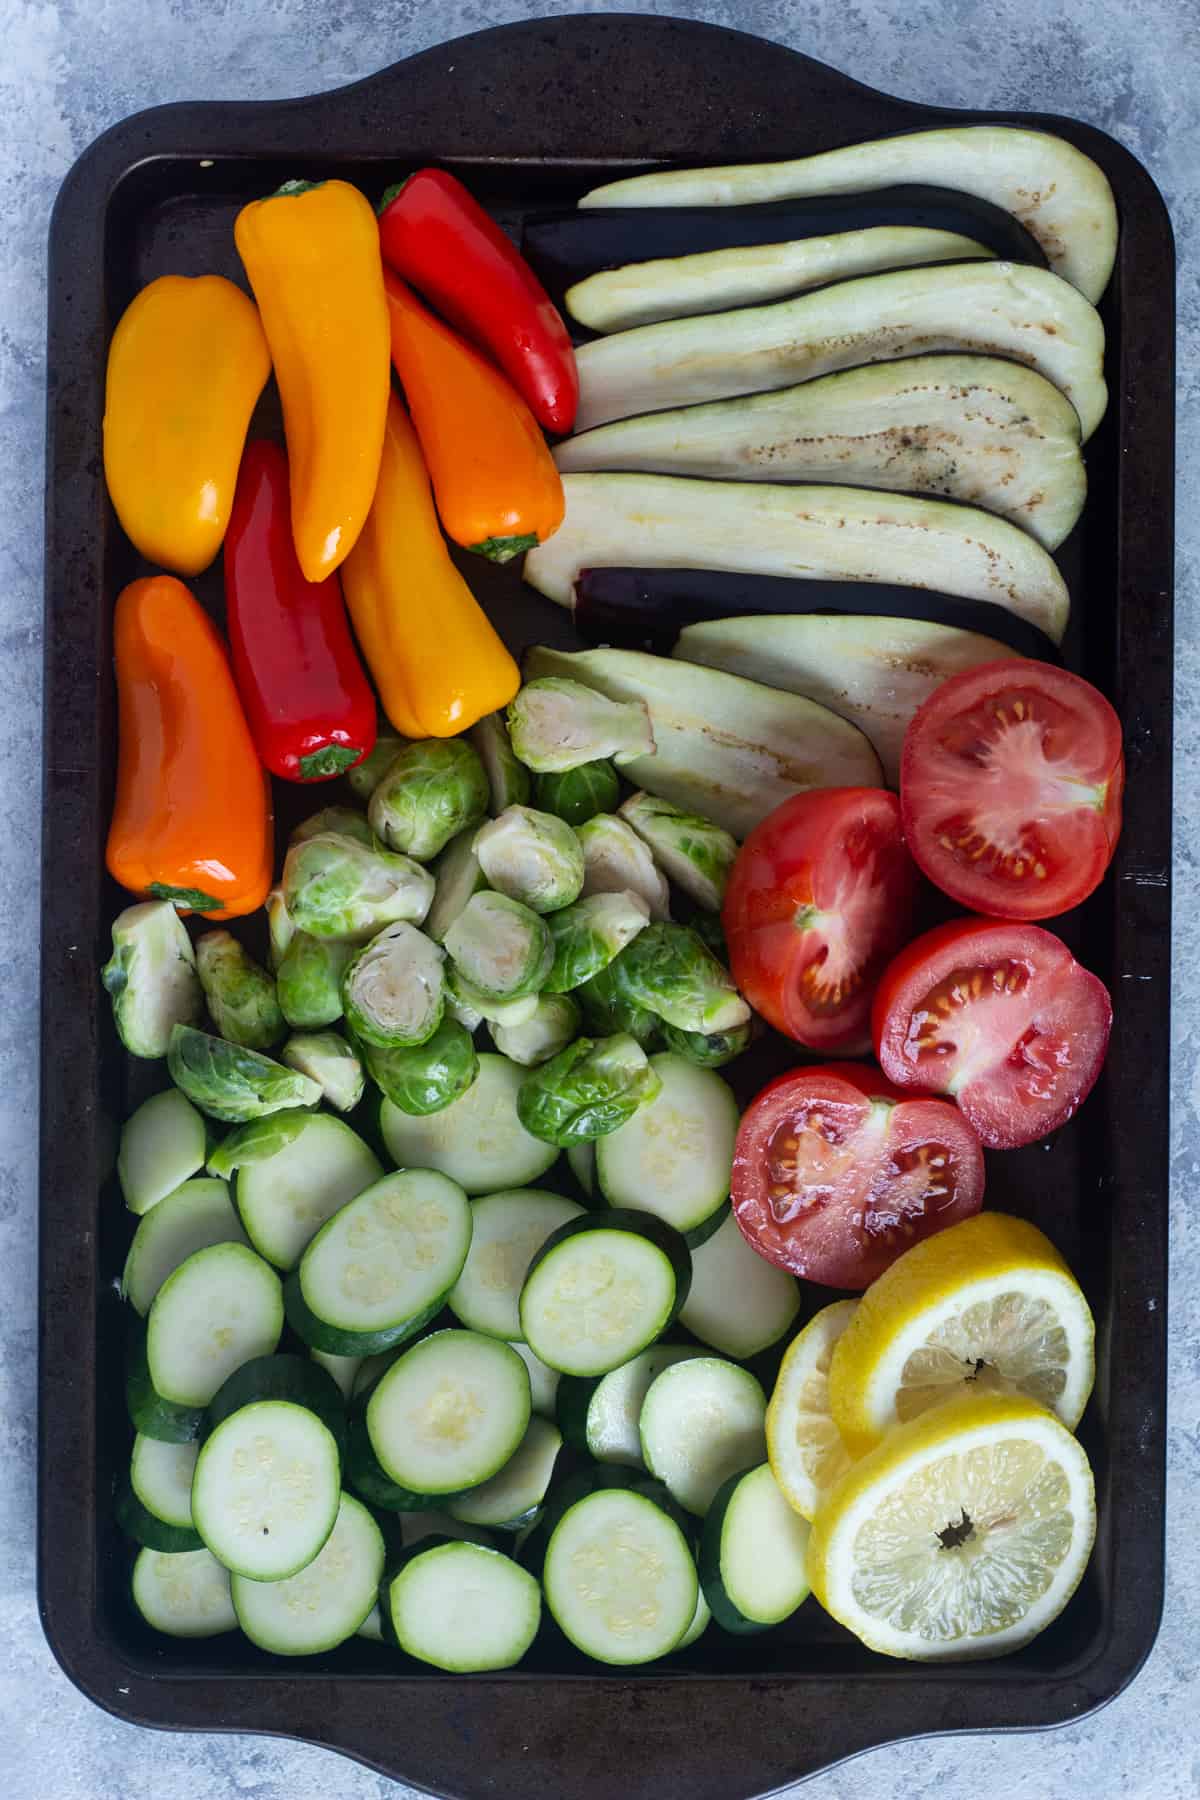 Cut the vegetables into slices and place them on a baking sheet. Drizzle with olive oil.